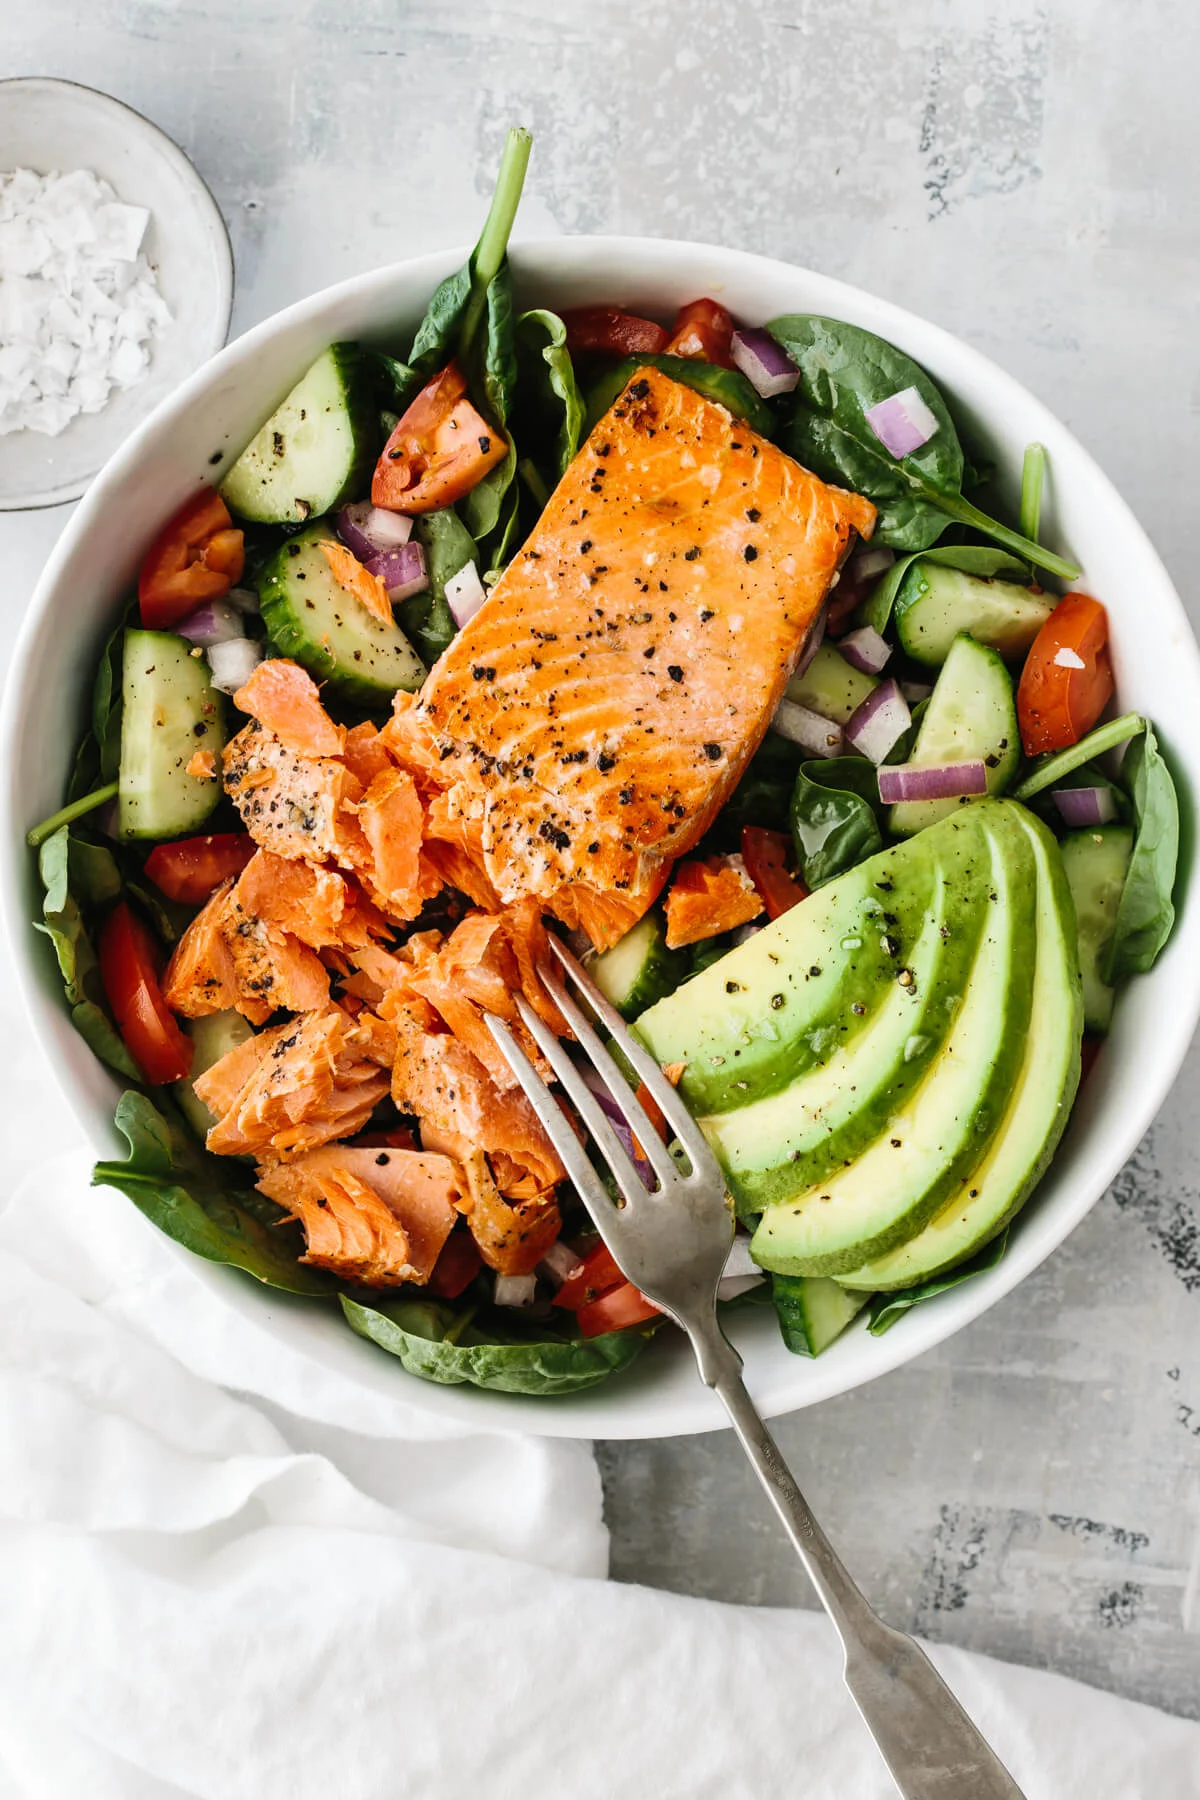 This salmon avocado salad is a healthy salad recipe that’s big on nutrients and flavor. It’s light yet filling, and simple enough to be made in under 20 minutes.